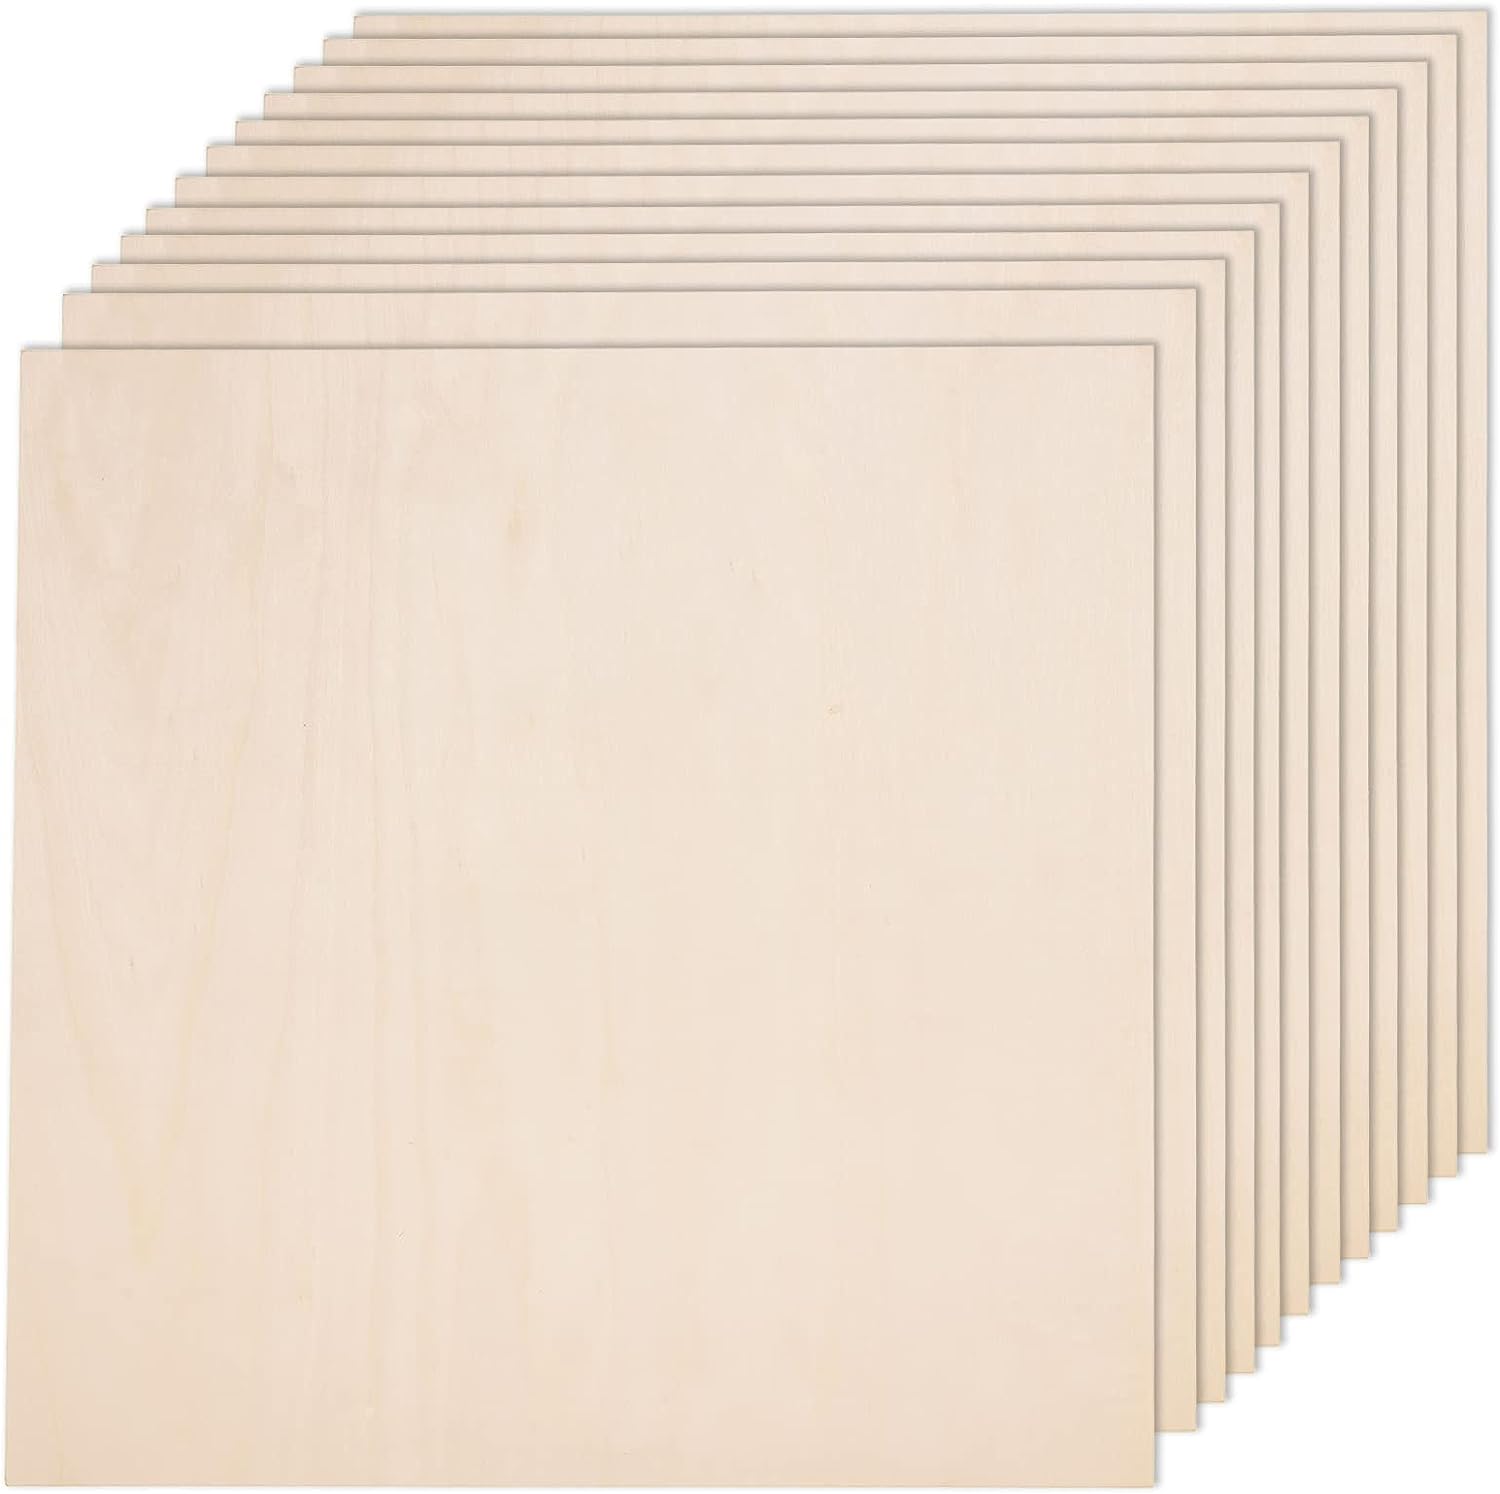  10 Pack Basswood Sheets 1/8 inch Plywood- 12 x 12 inch